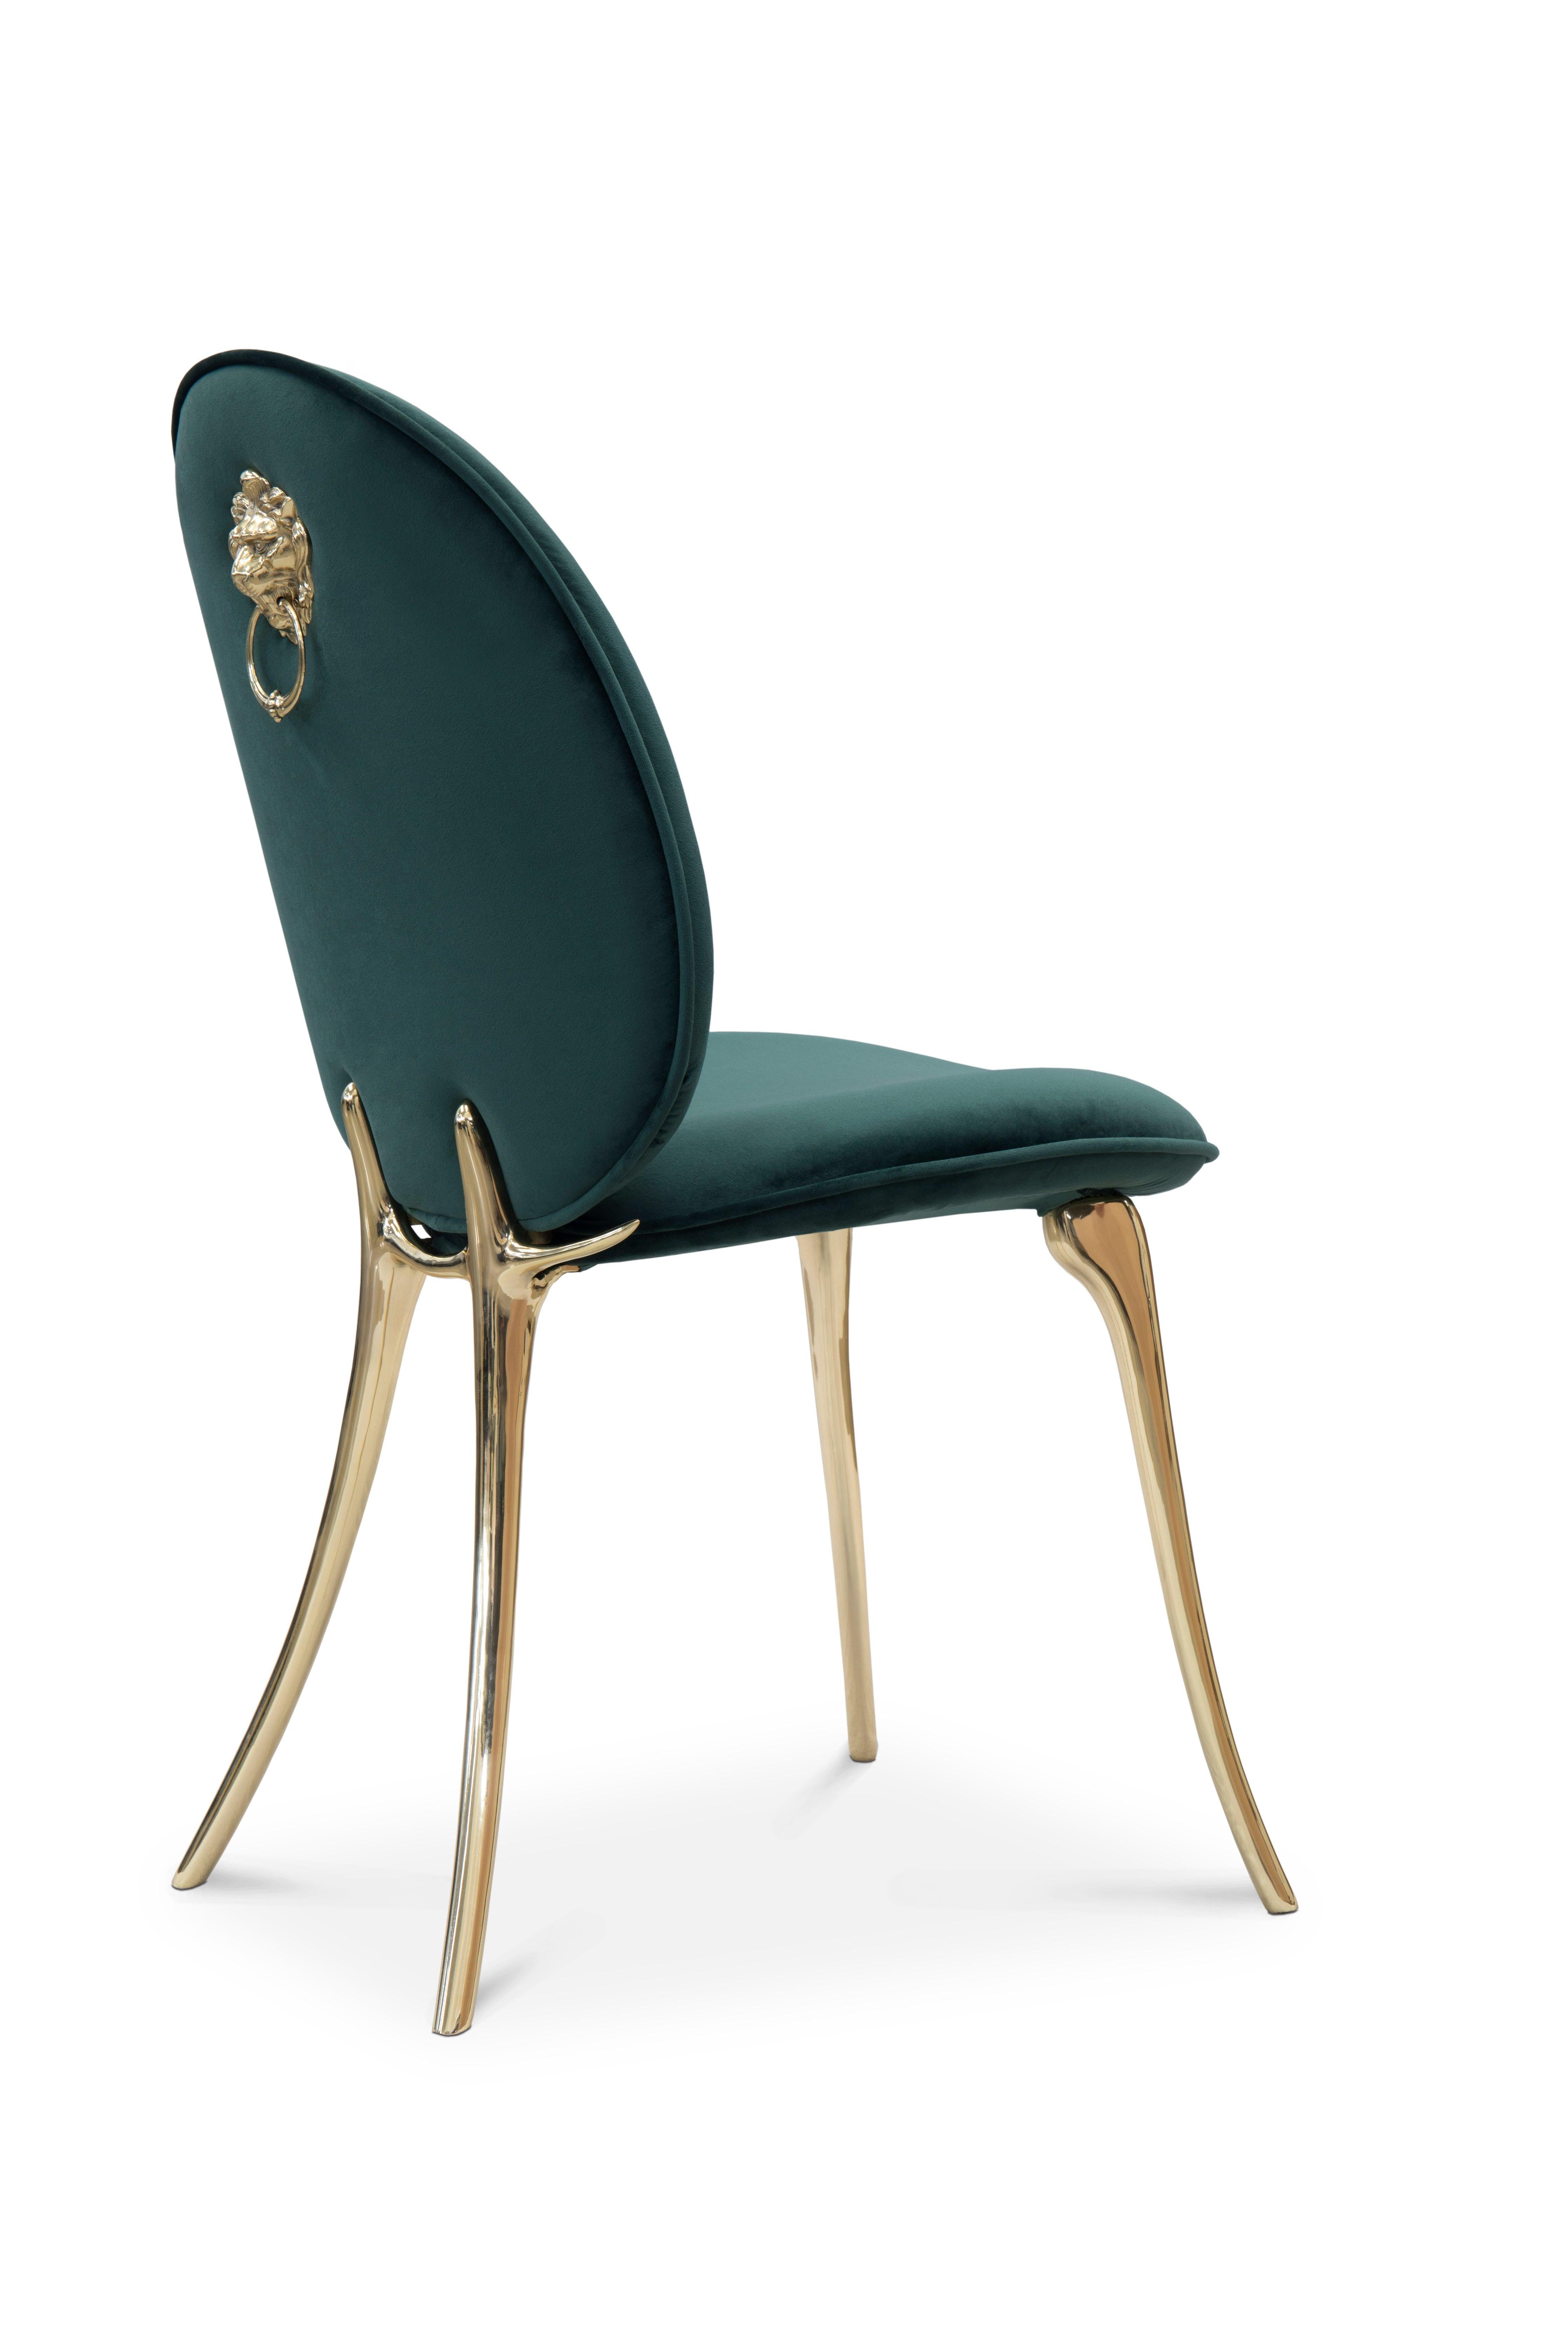 Metal Modern Contemporary Soleil Dining Chair Polished Casted Brass by Boca do Lobo For Sale